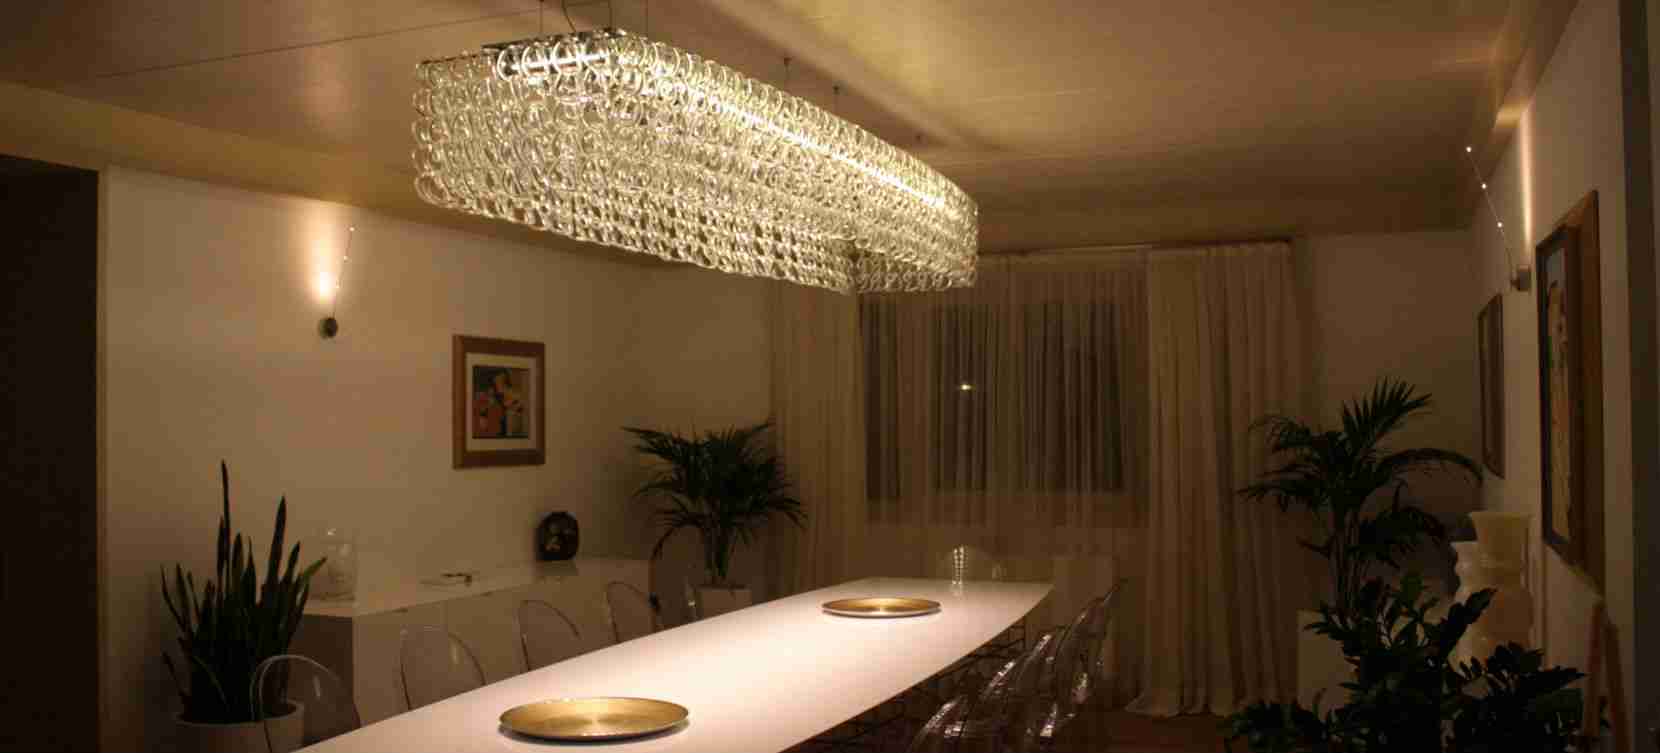 Transparent Glass Chain Structure Large Hanging Lamp for Living Room